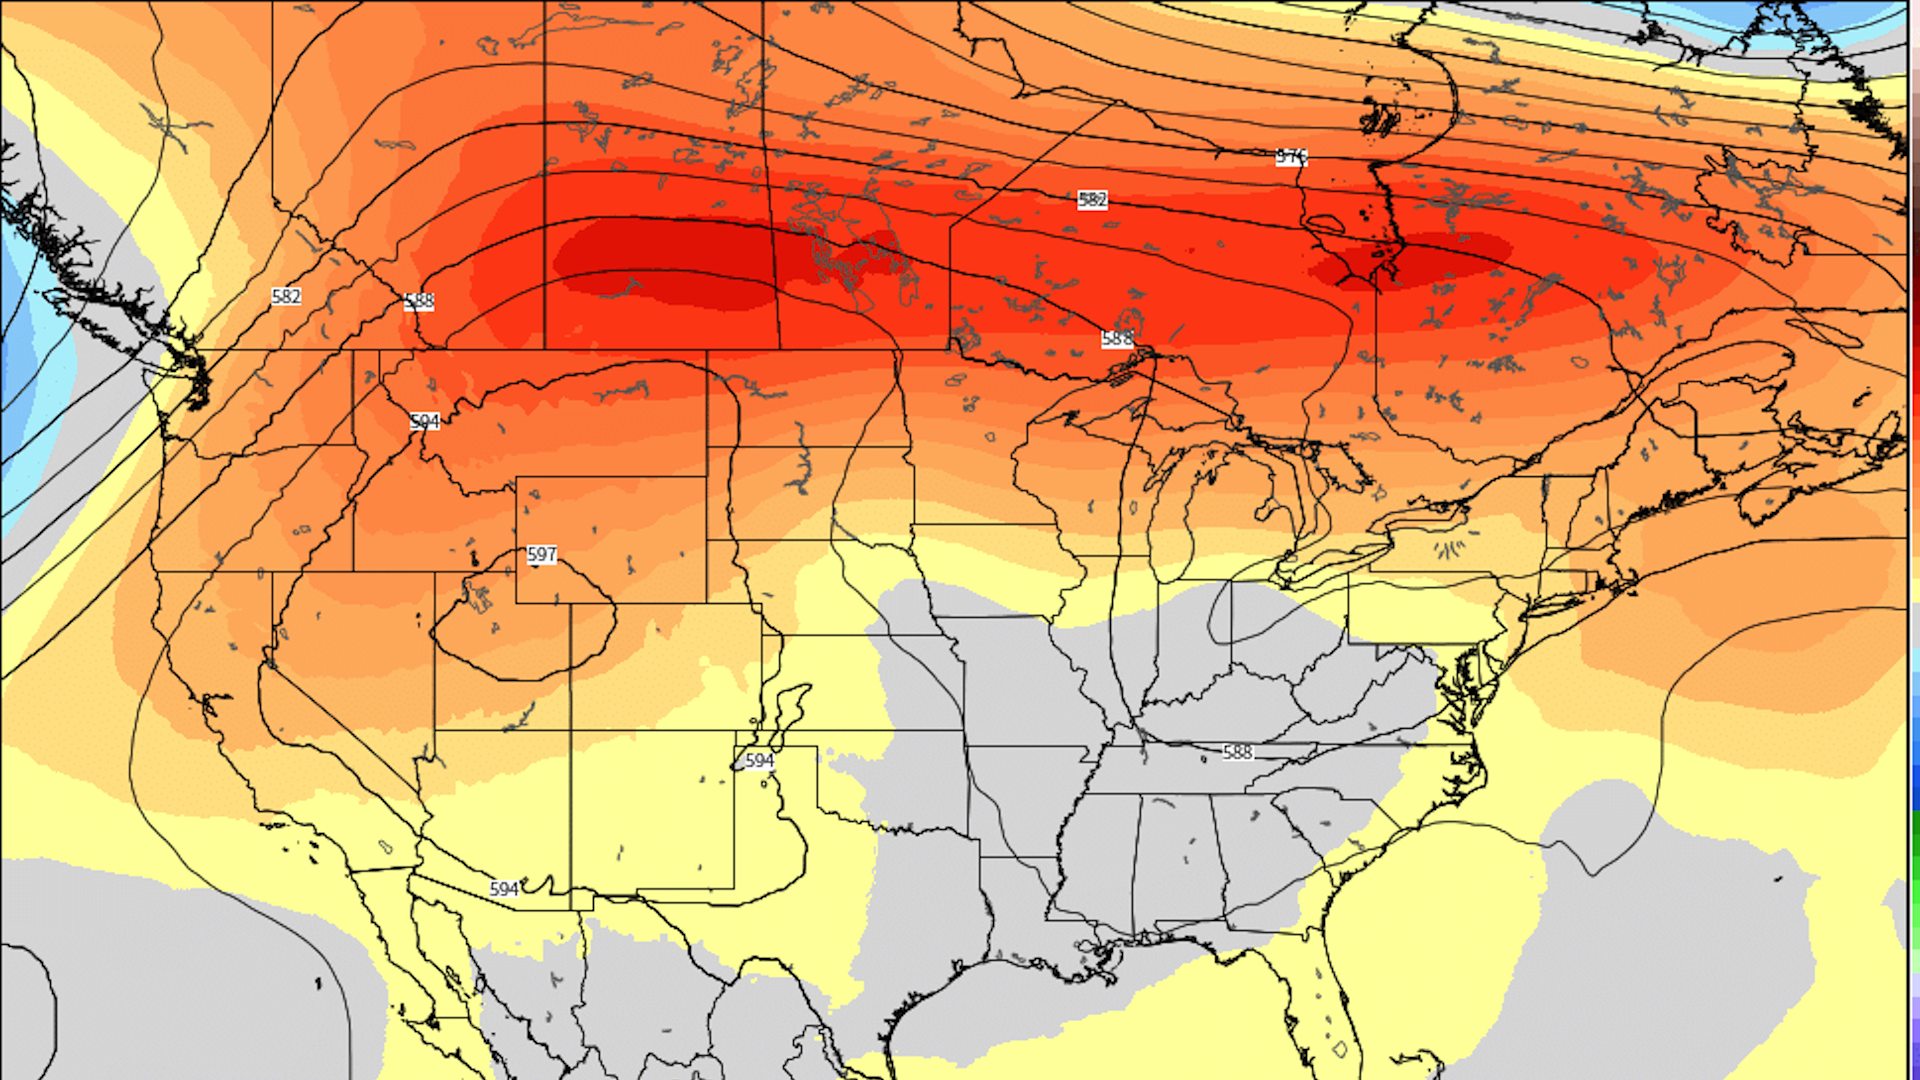 Map showing red and orange colors where temperatures will be extremely hot in mid-July.